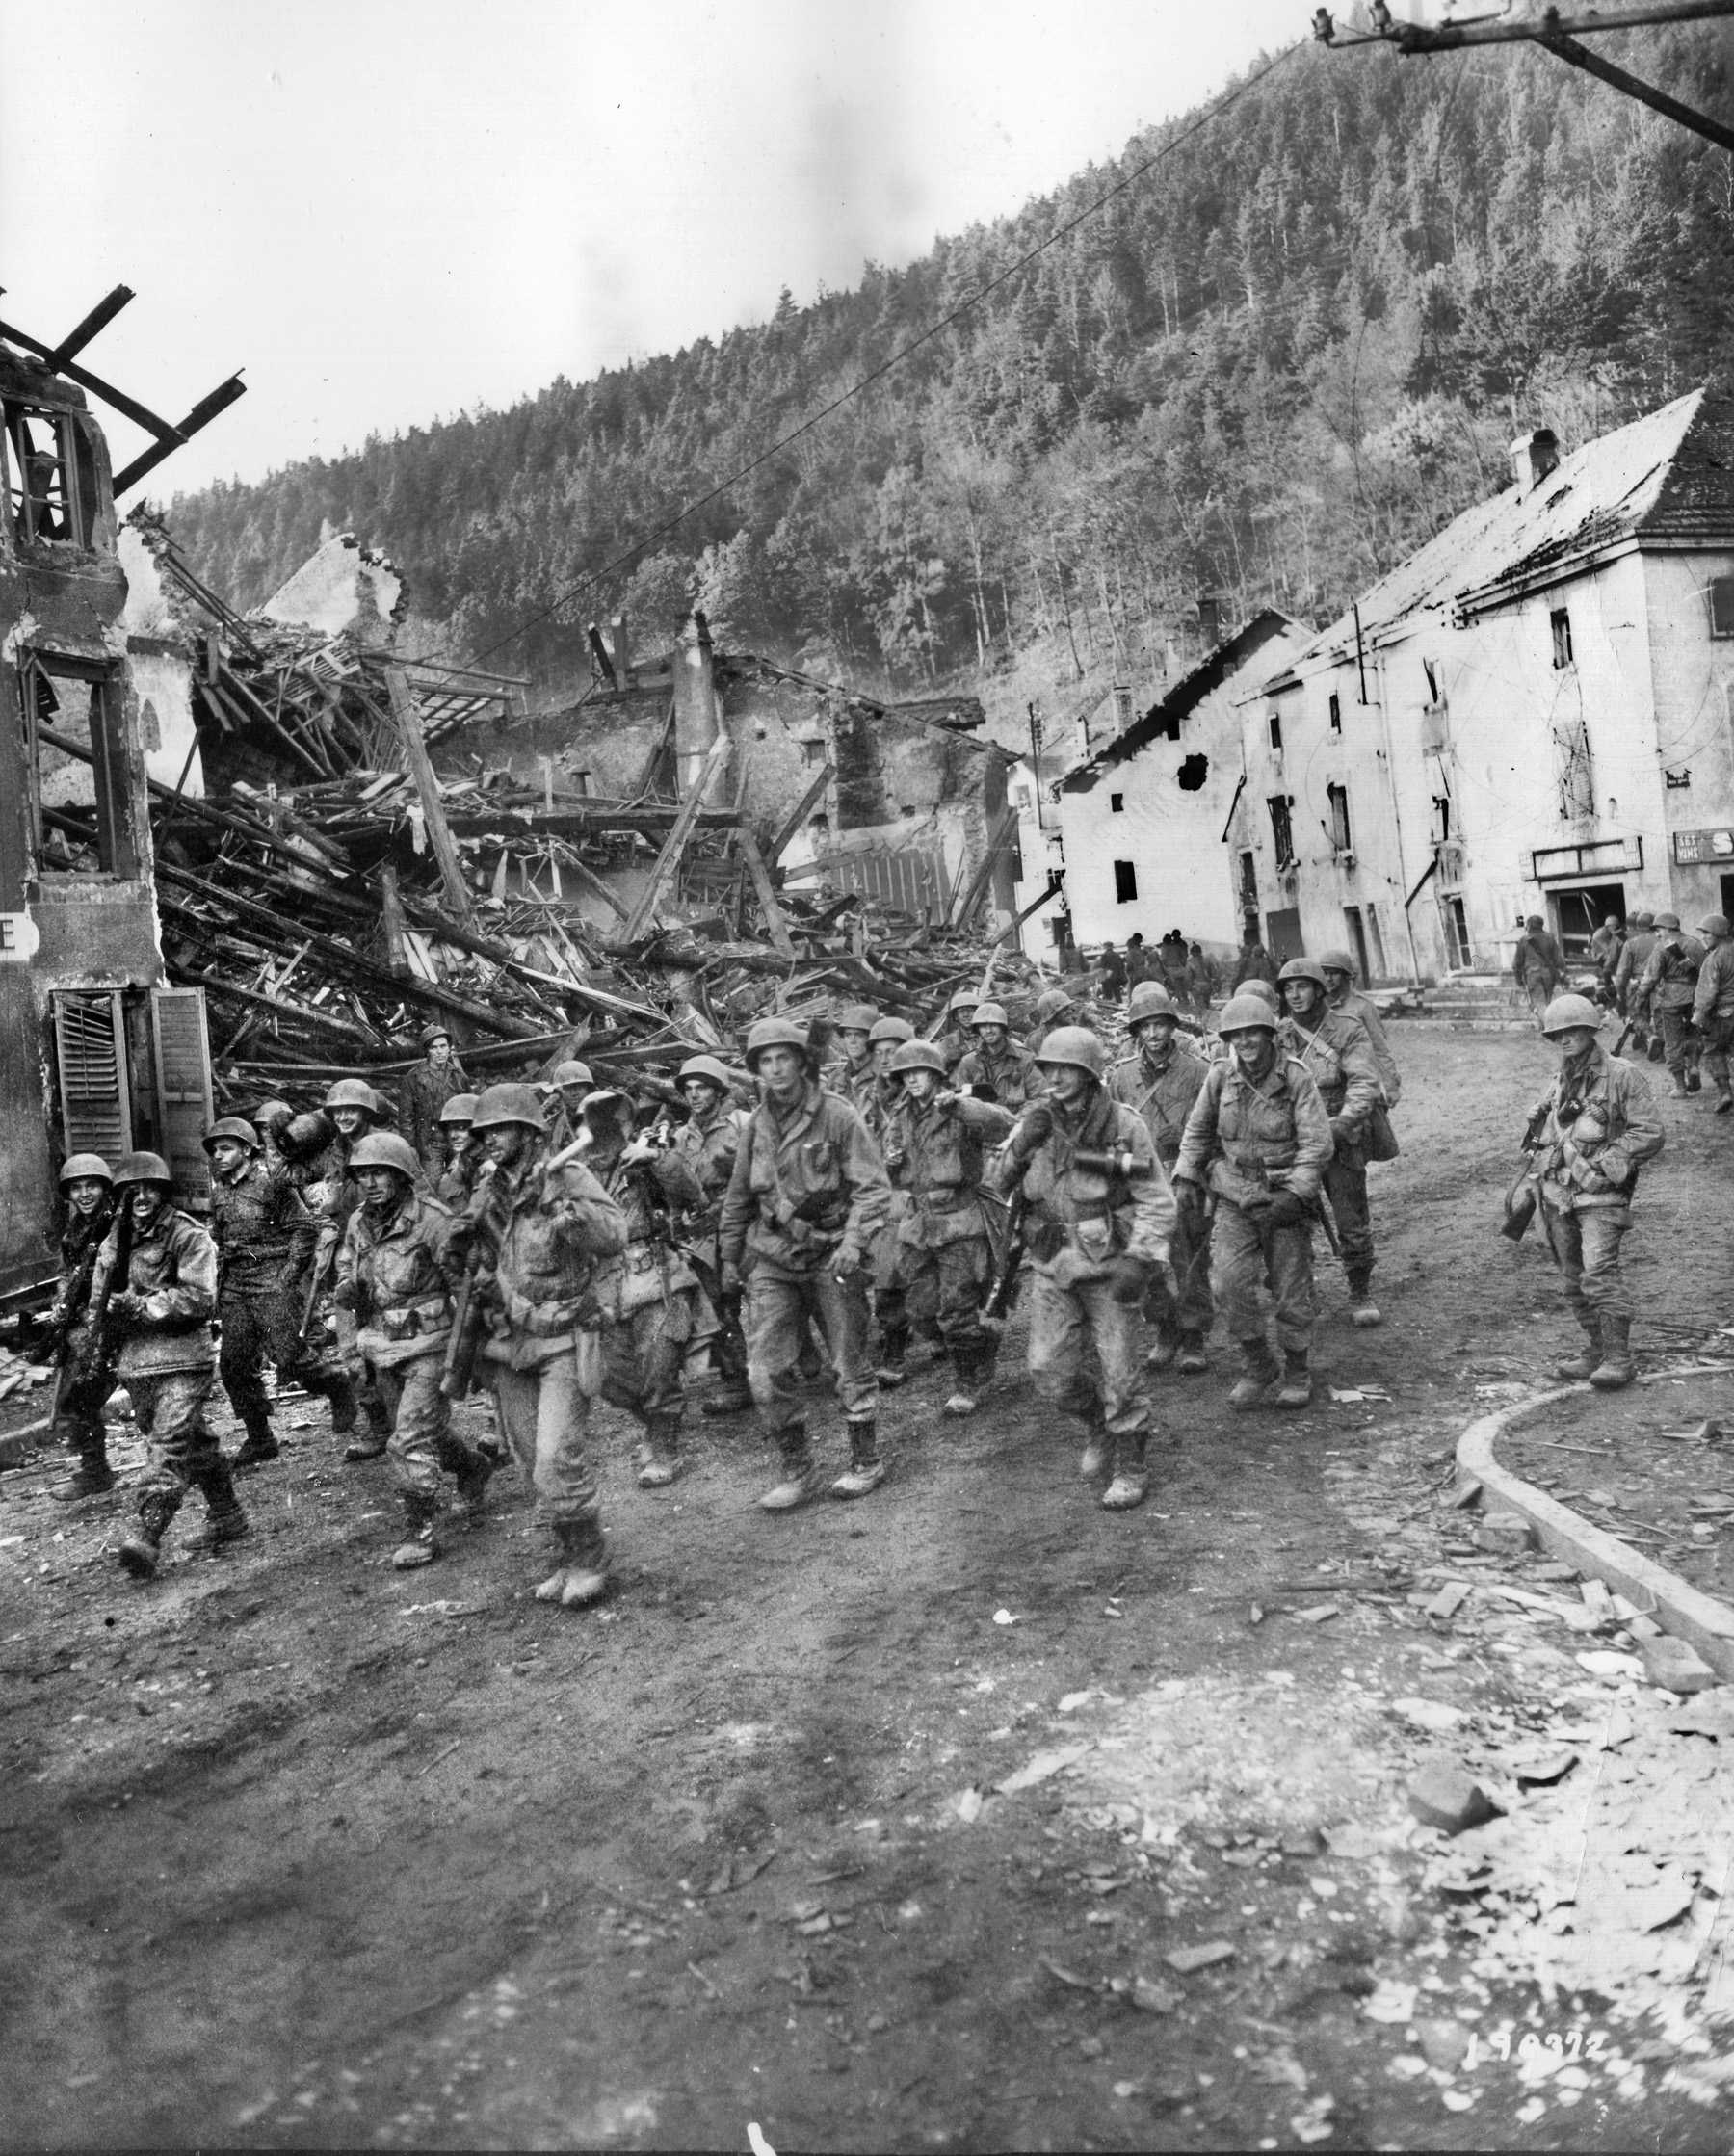 Men of Company C, 397th Regiment, move through the partially demolished town of Raon L’Étape, October 18, 1944. Rincker said his regiment lost 167 men killed and 511 men wounded during the Vosges campaign. 